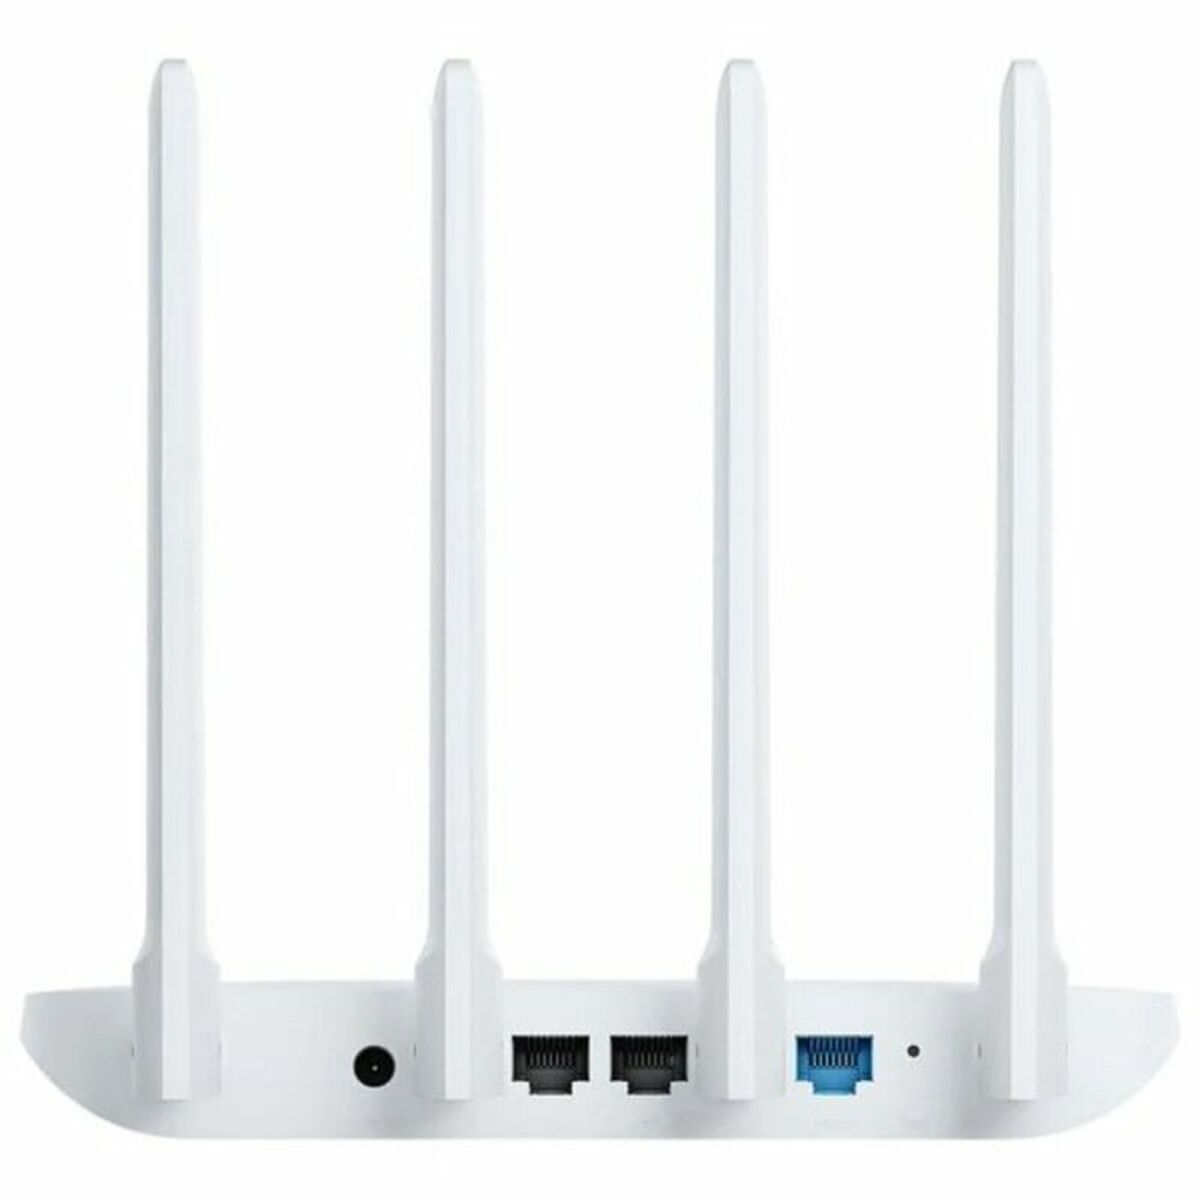 Router Xiaomi WiFi Router 4С 300 Mbps White